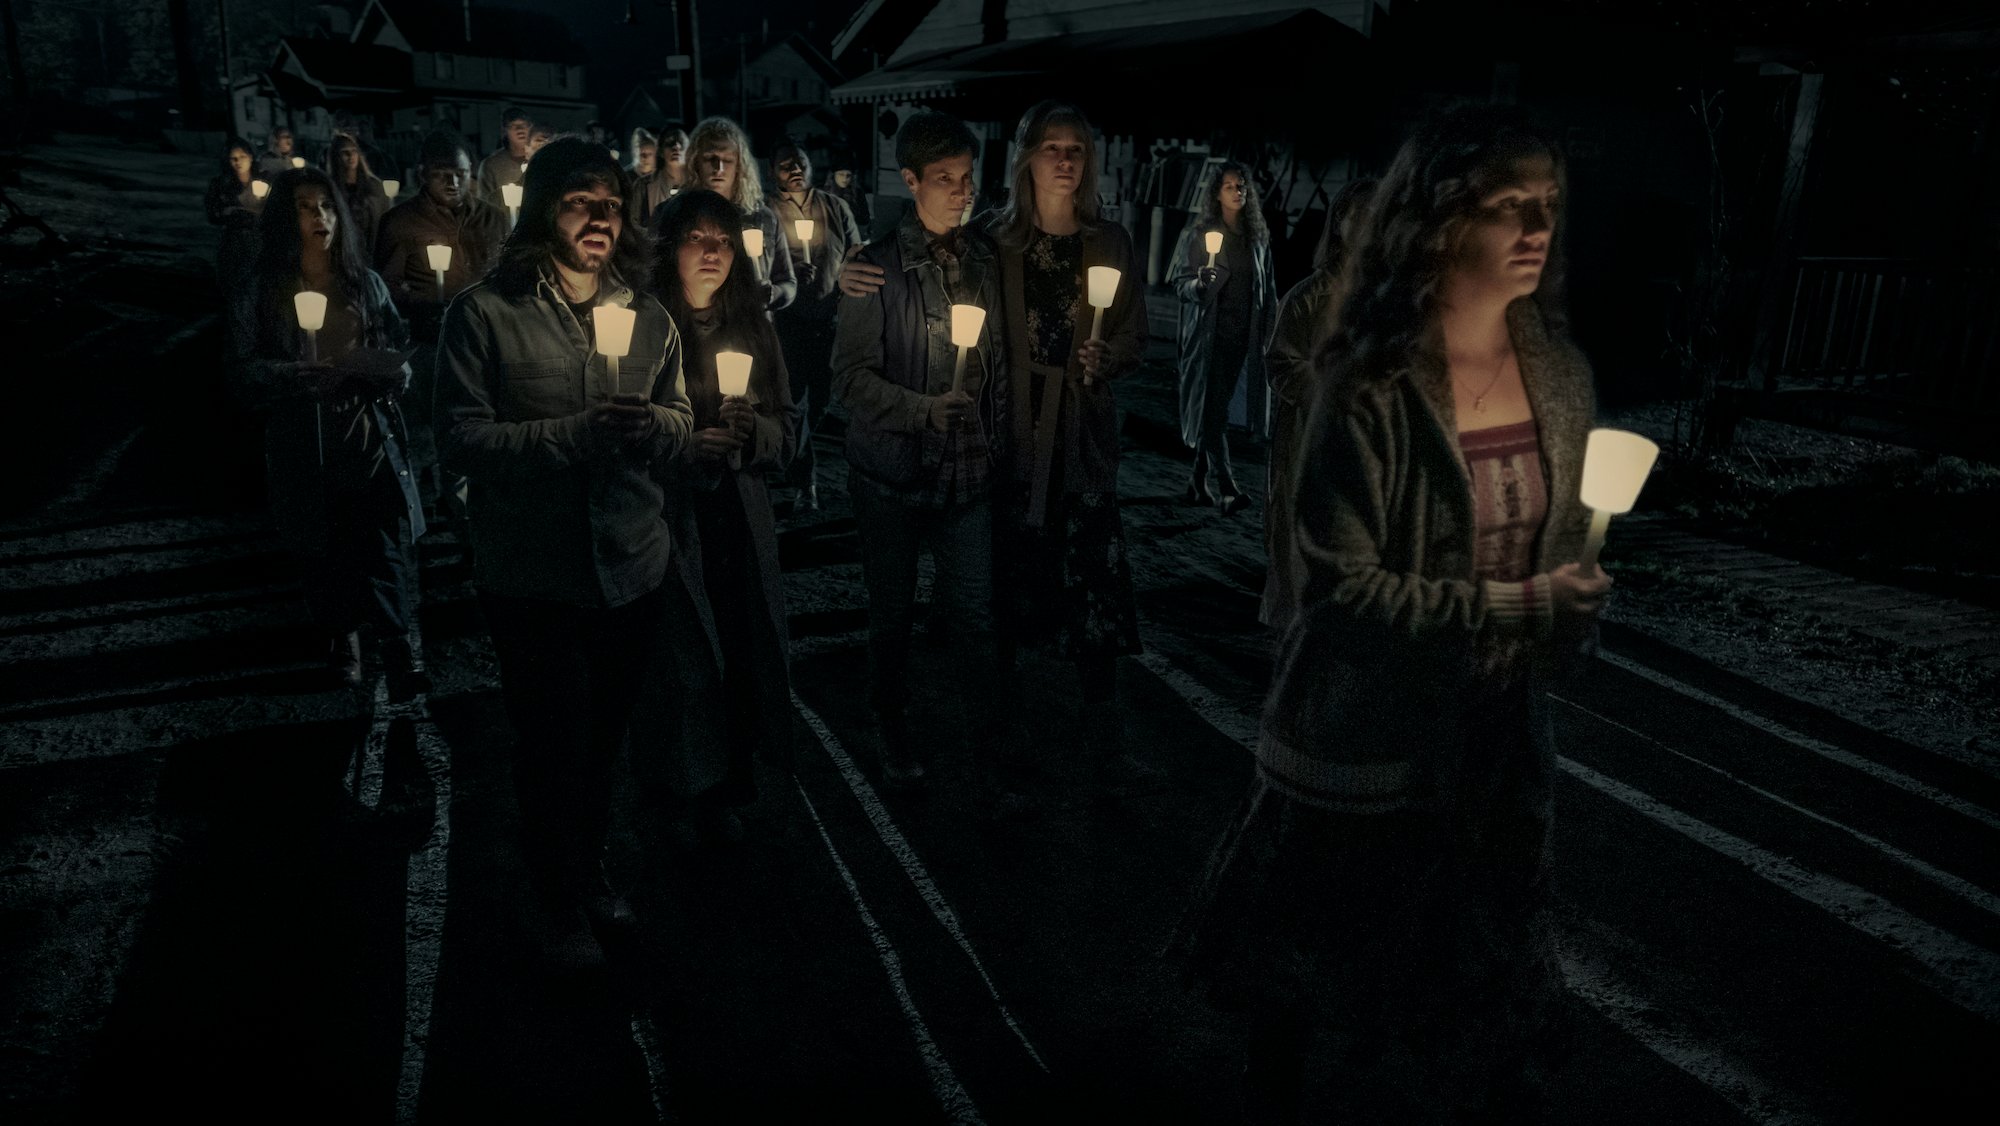 Cast members in a scene from 'Midnight Mass' holding candles while walking as a group